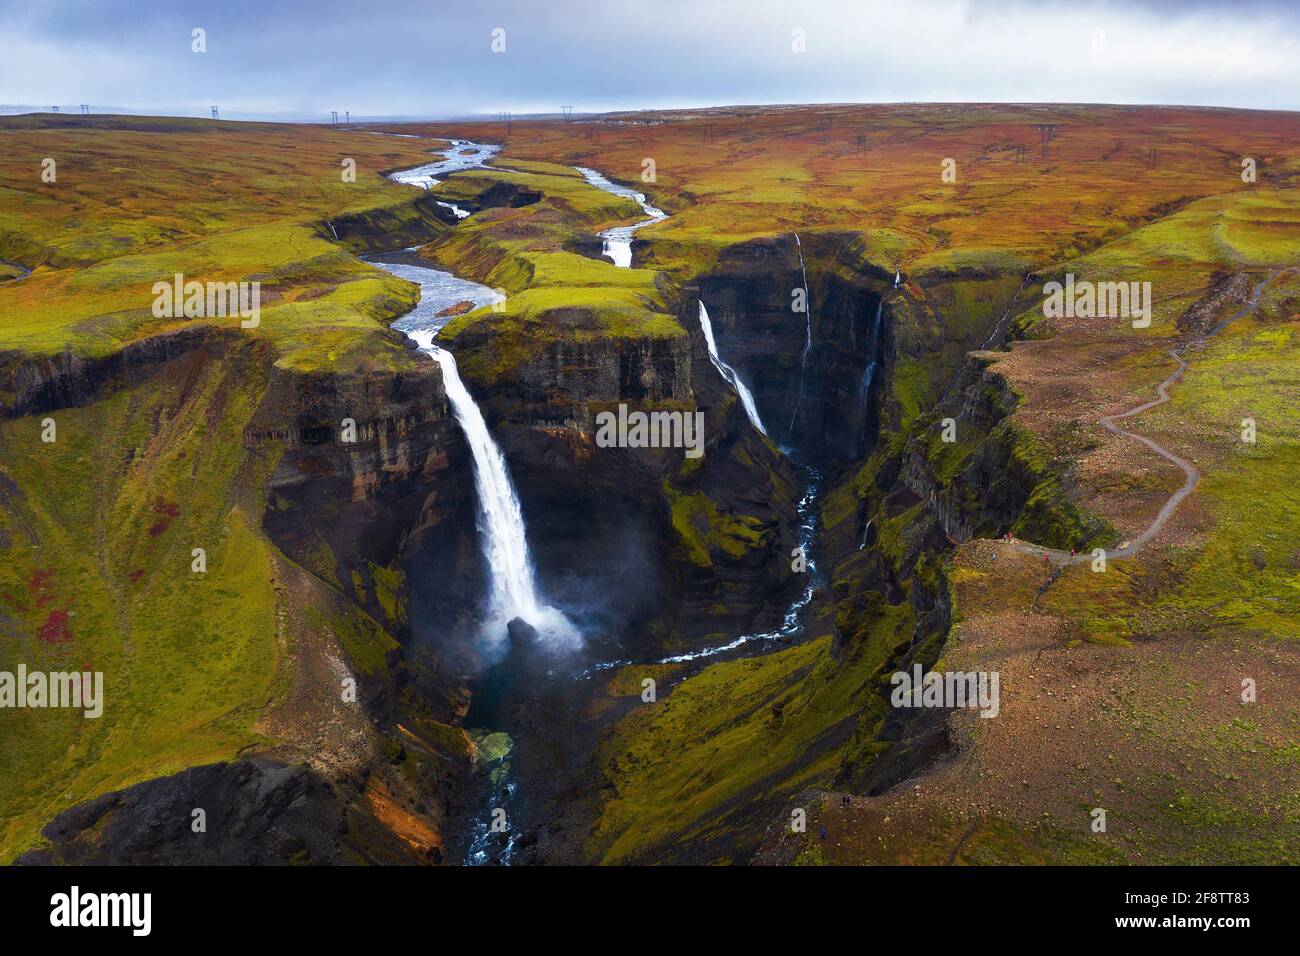 Aerial view of the Haifoss and Granni waterfalls in Iceland Stock Photo